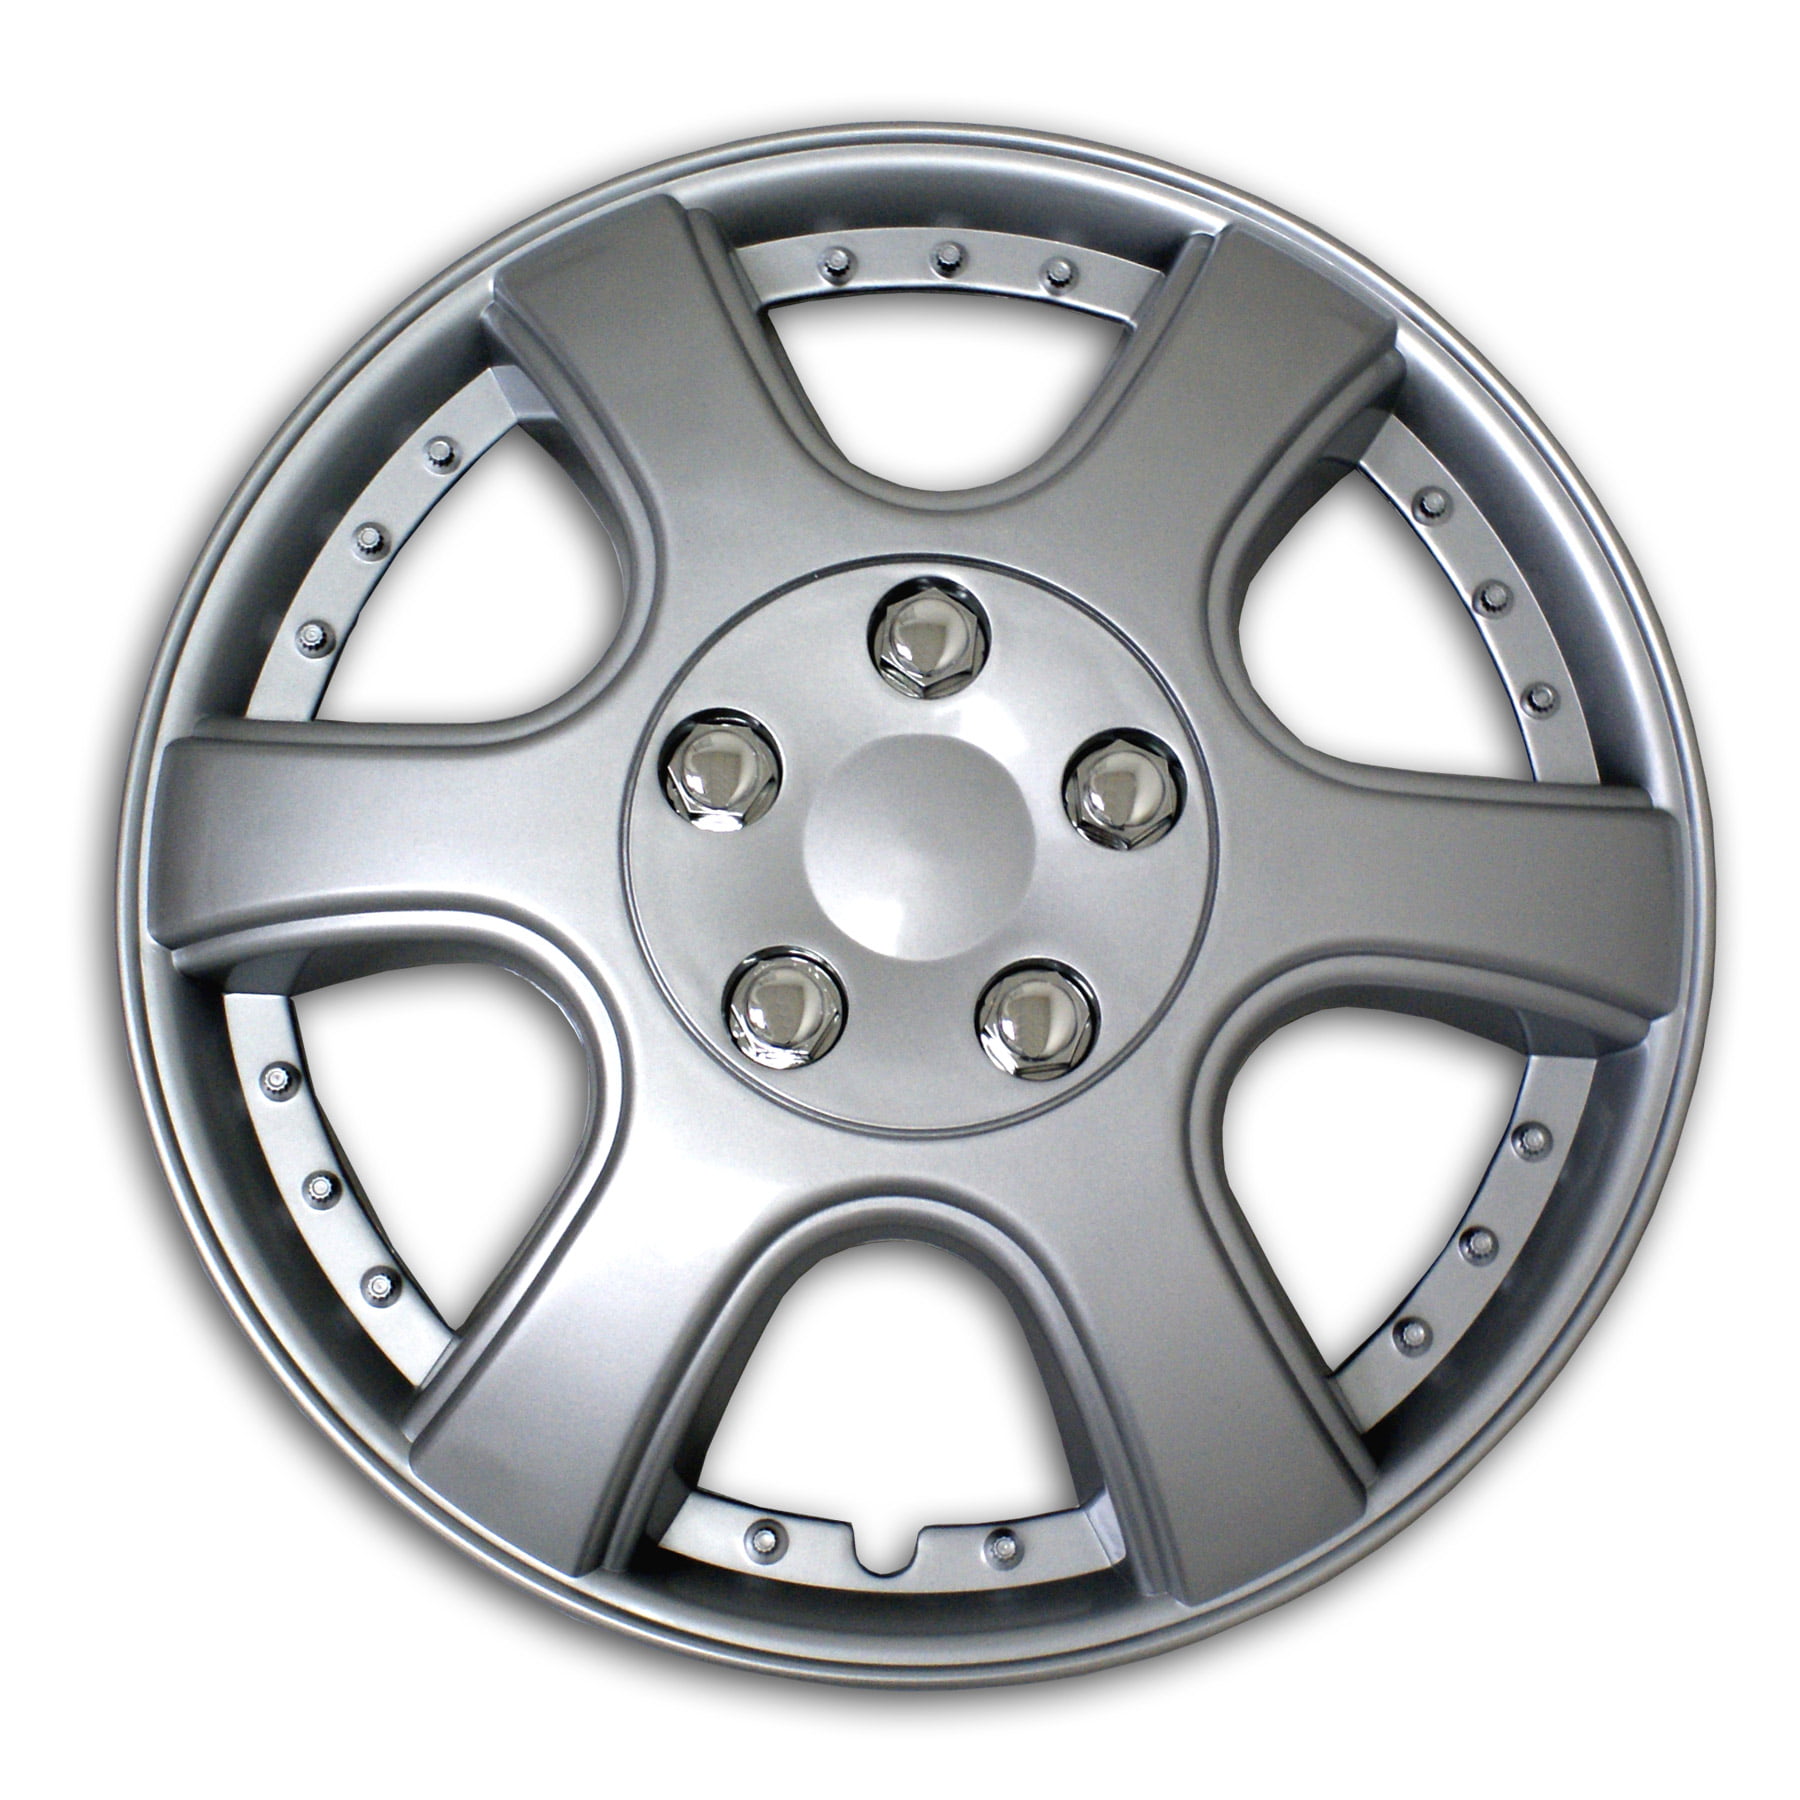 14" Hubcaps Wheel Covers OEM Replacement Wheel 4pcs Silver ABS Material 